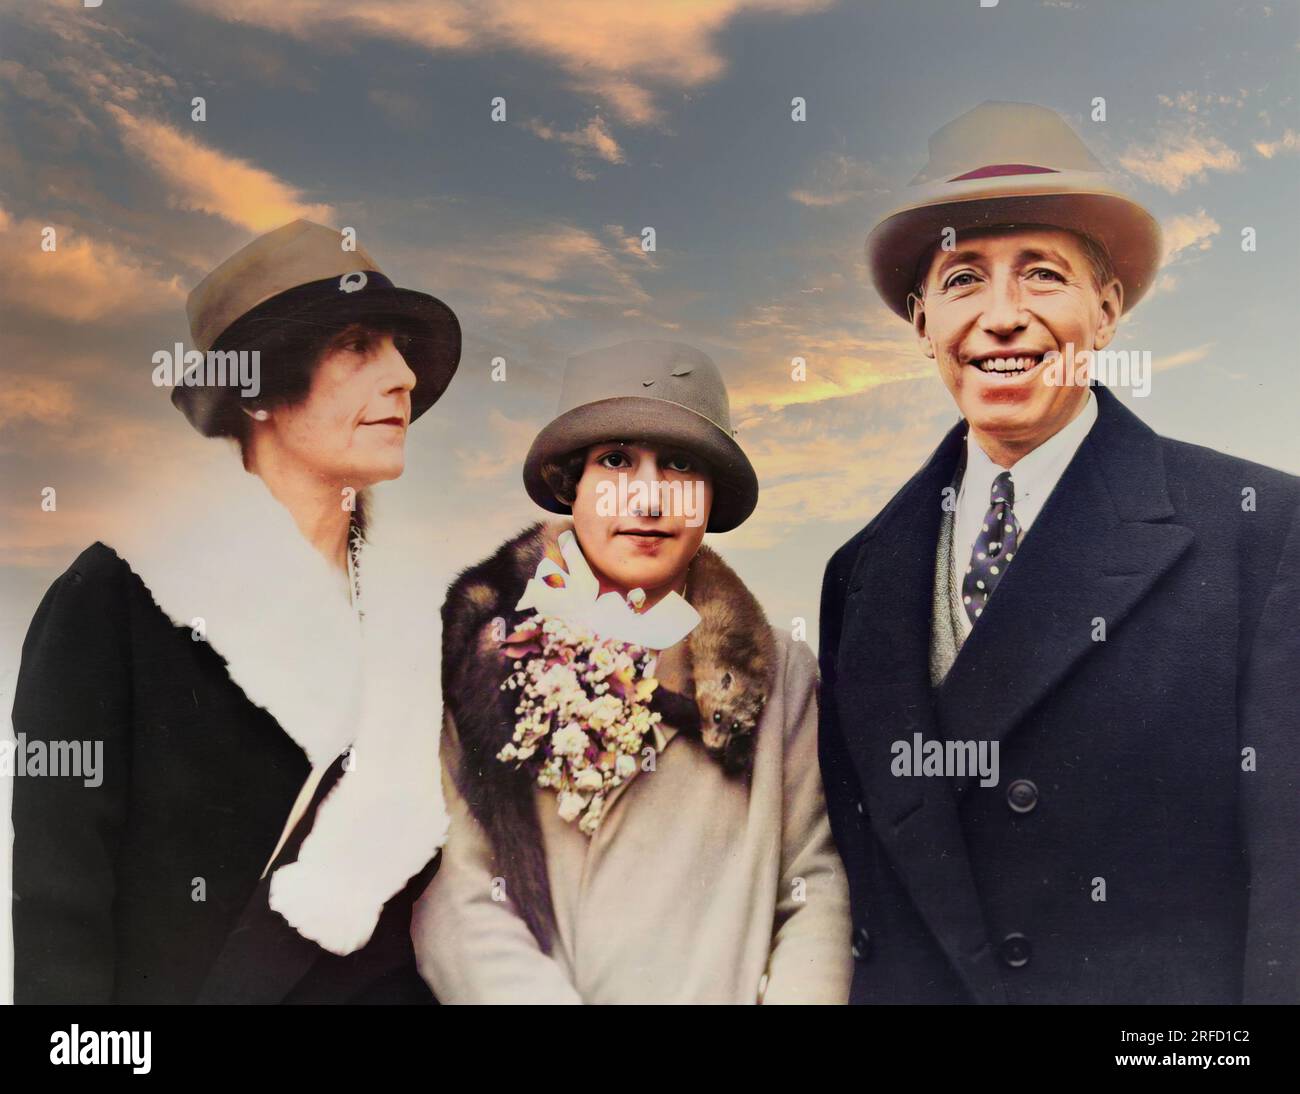 This is a colourised image of Pierre Camille Cartier (1878-1964), the famous French jeweller, his wife Elma and daughter Marion. In 1909 he opened his New York Store on Fifth Avenue. Among its famous customers were  have included Rockefellers, Fords and Astors and Mrs. John F. Kennedy, the Duchess of Windsor and Princess Grace of Monaco; Stock Photo